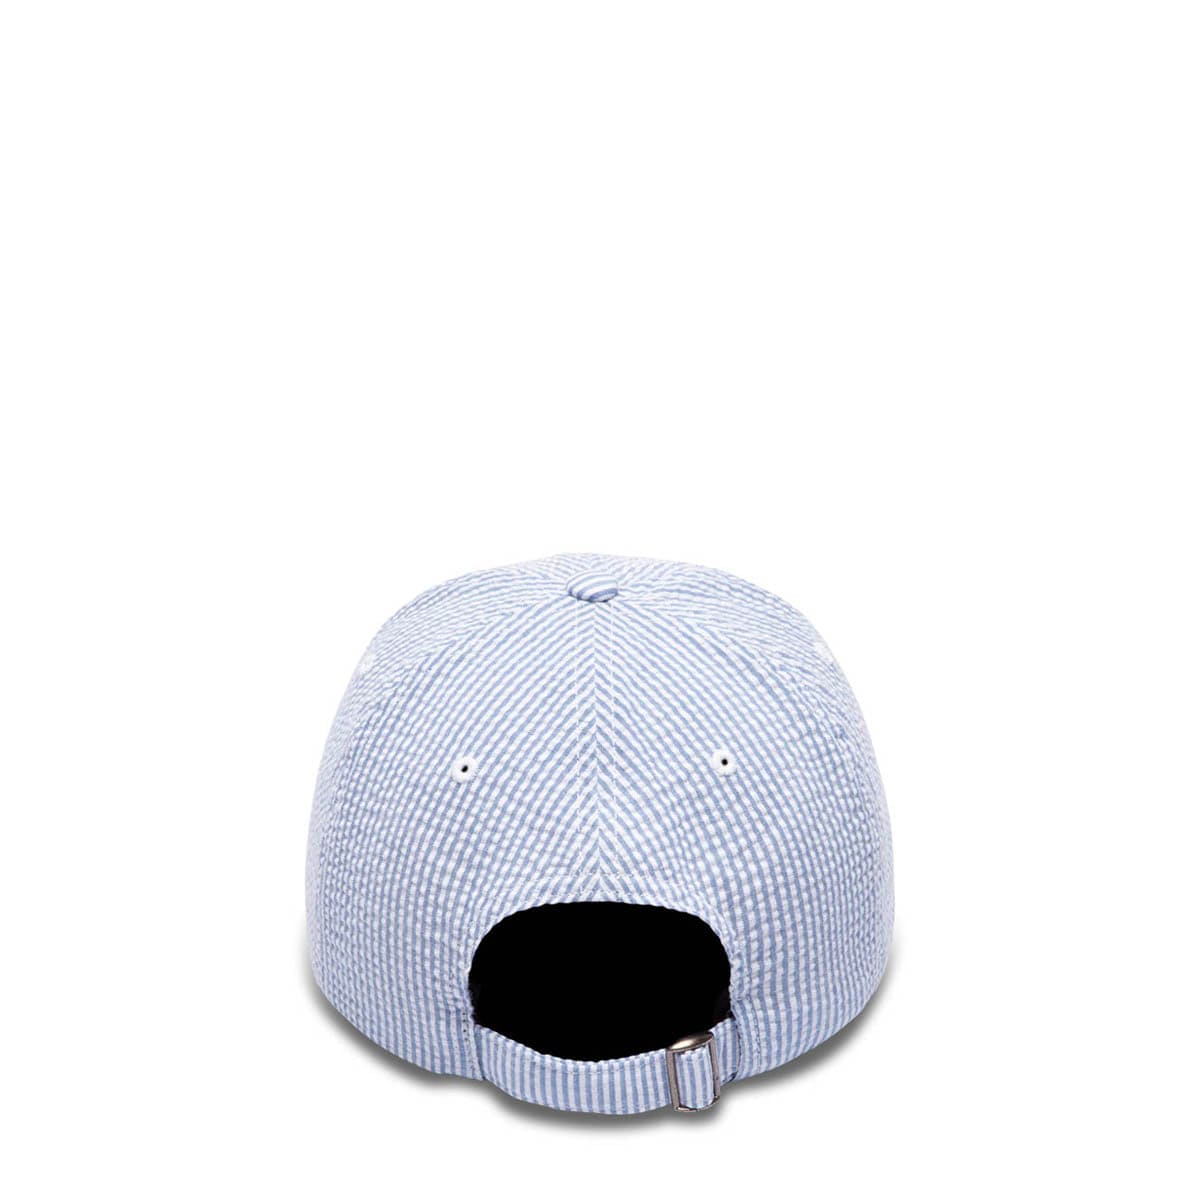 By Parra Headwear WHITE BLUE / O/S CLASSIC LOGO 6 PANEL HAT